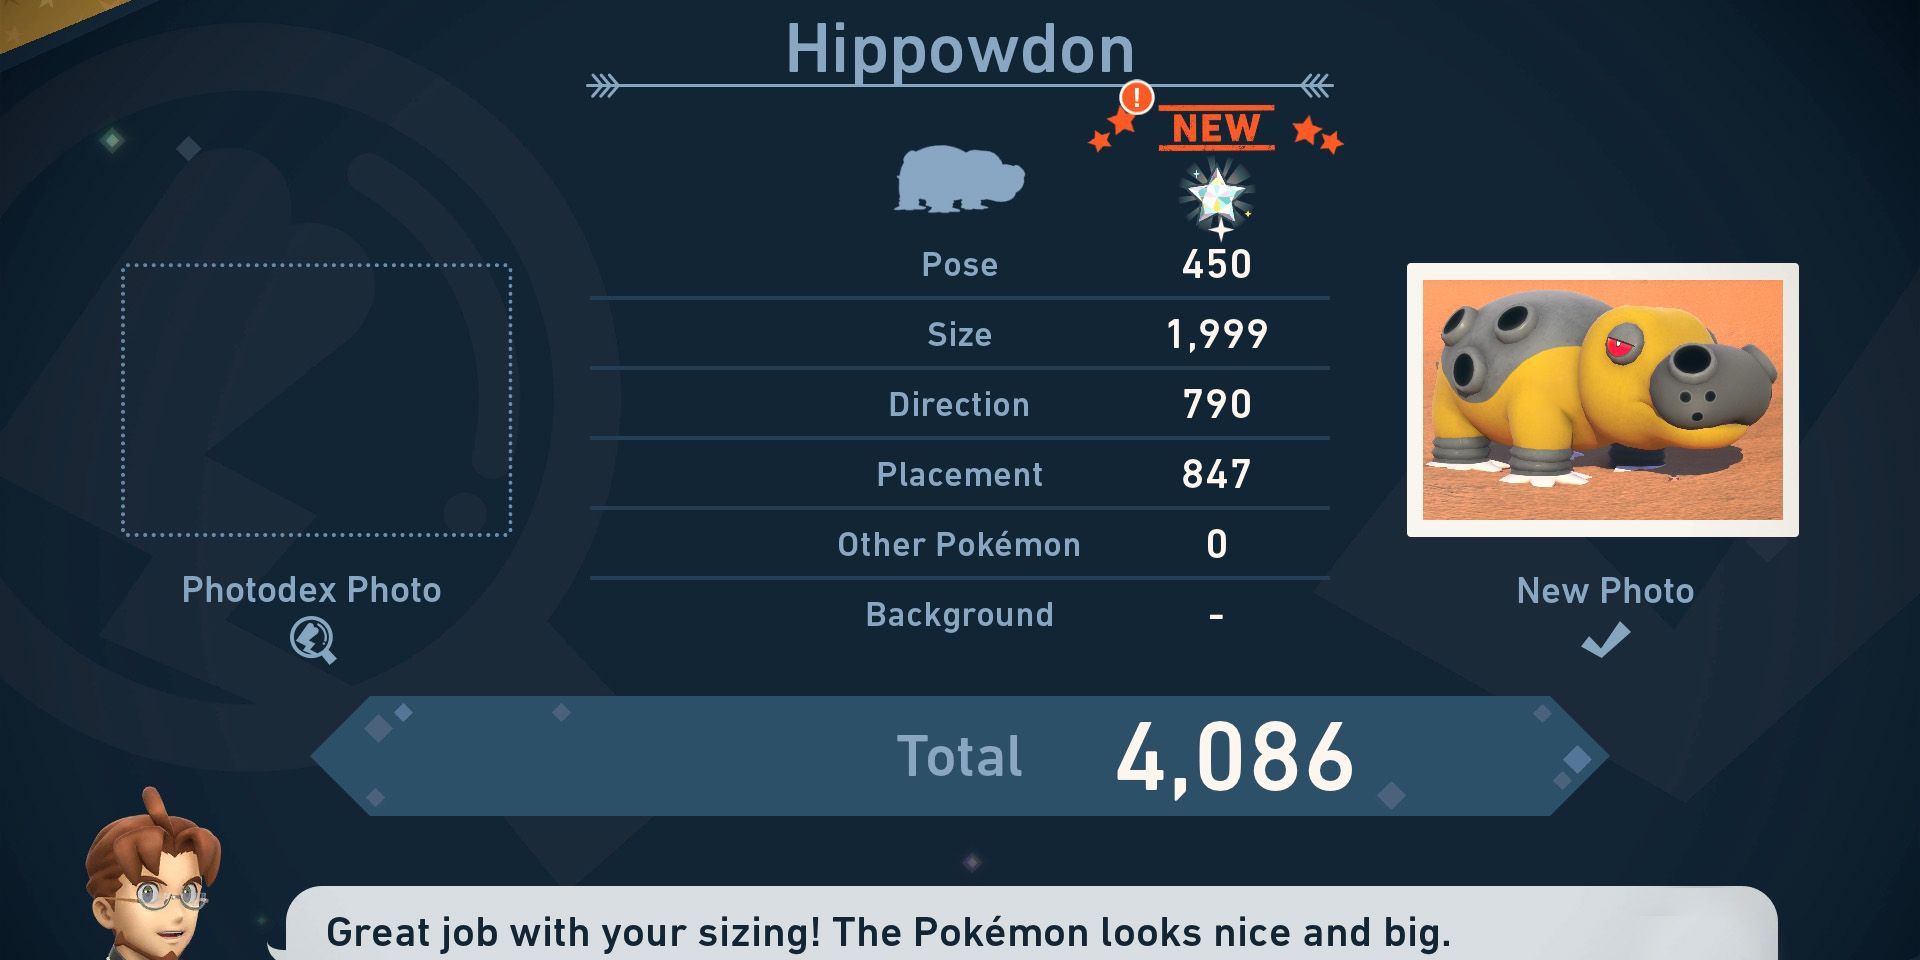 A hippodown in New Pokemon Snap